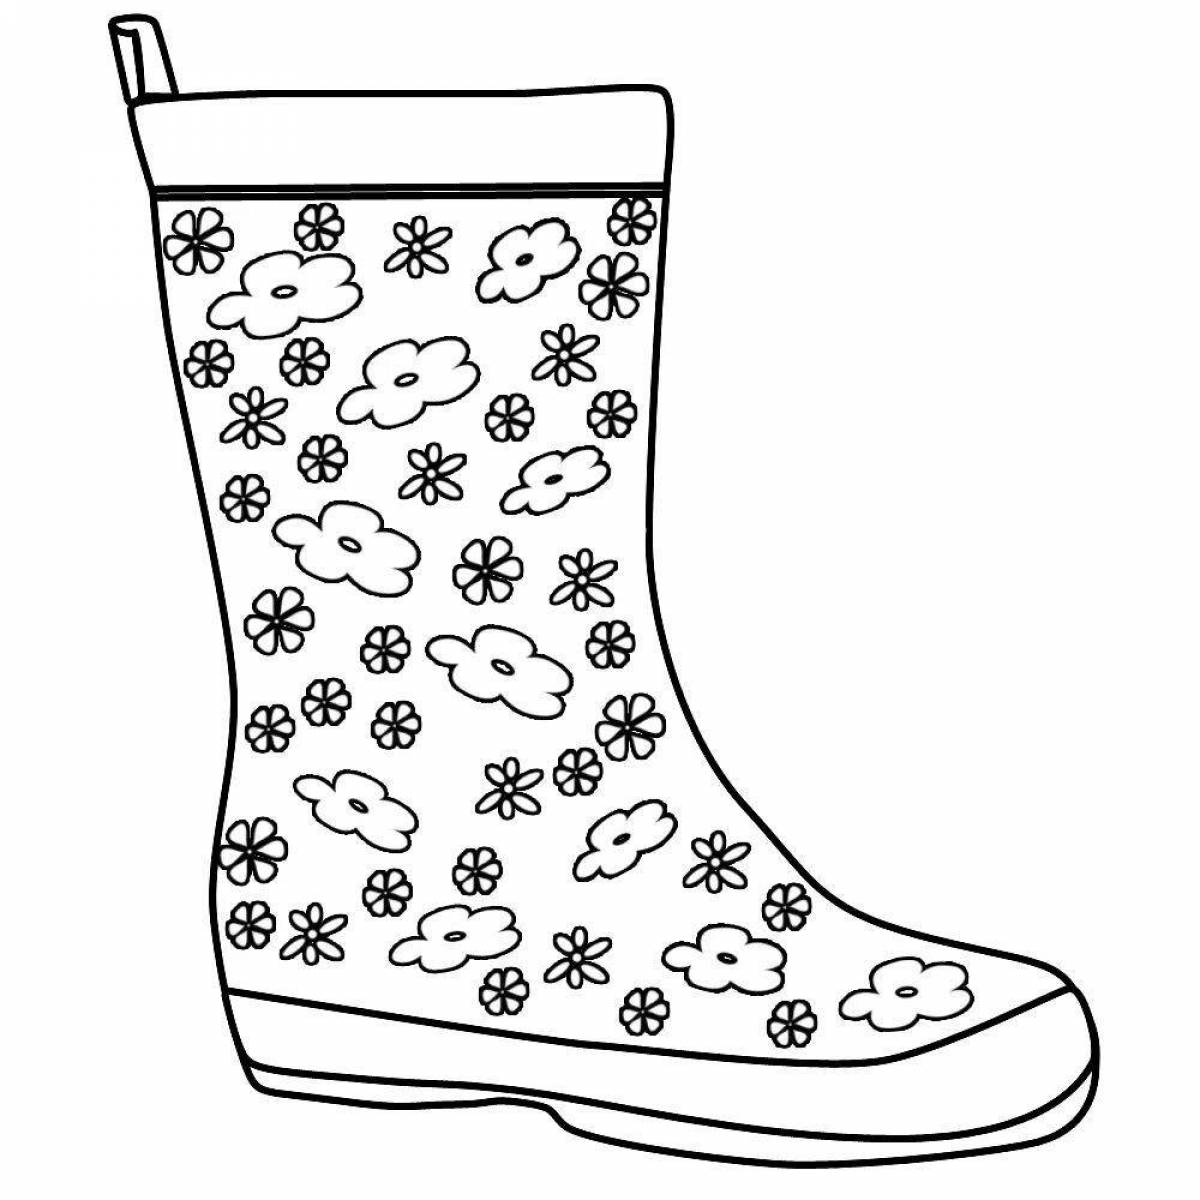 Fabulous coloring pages of winter shoes for kids